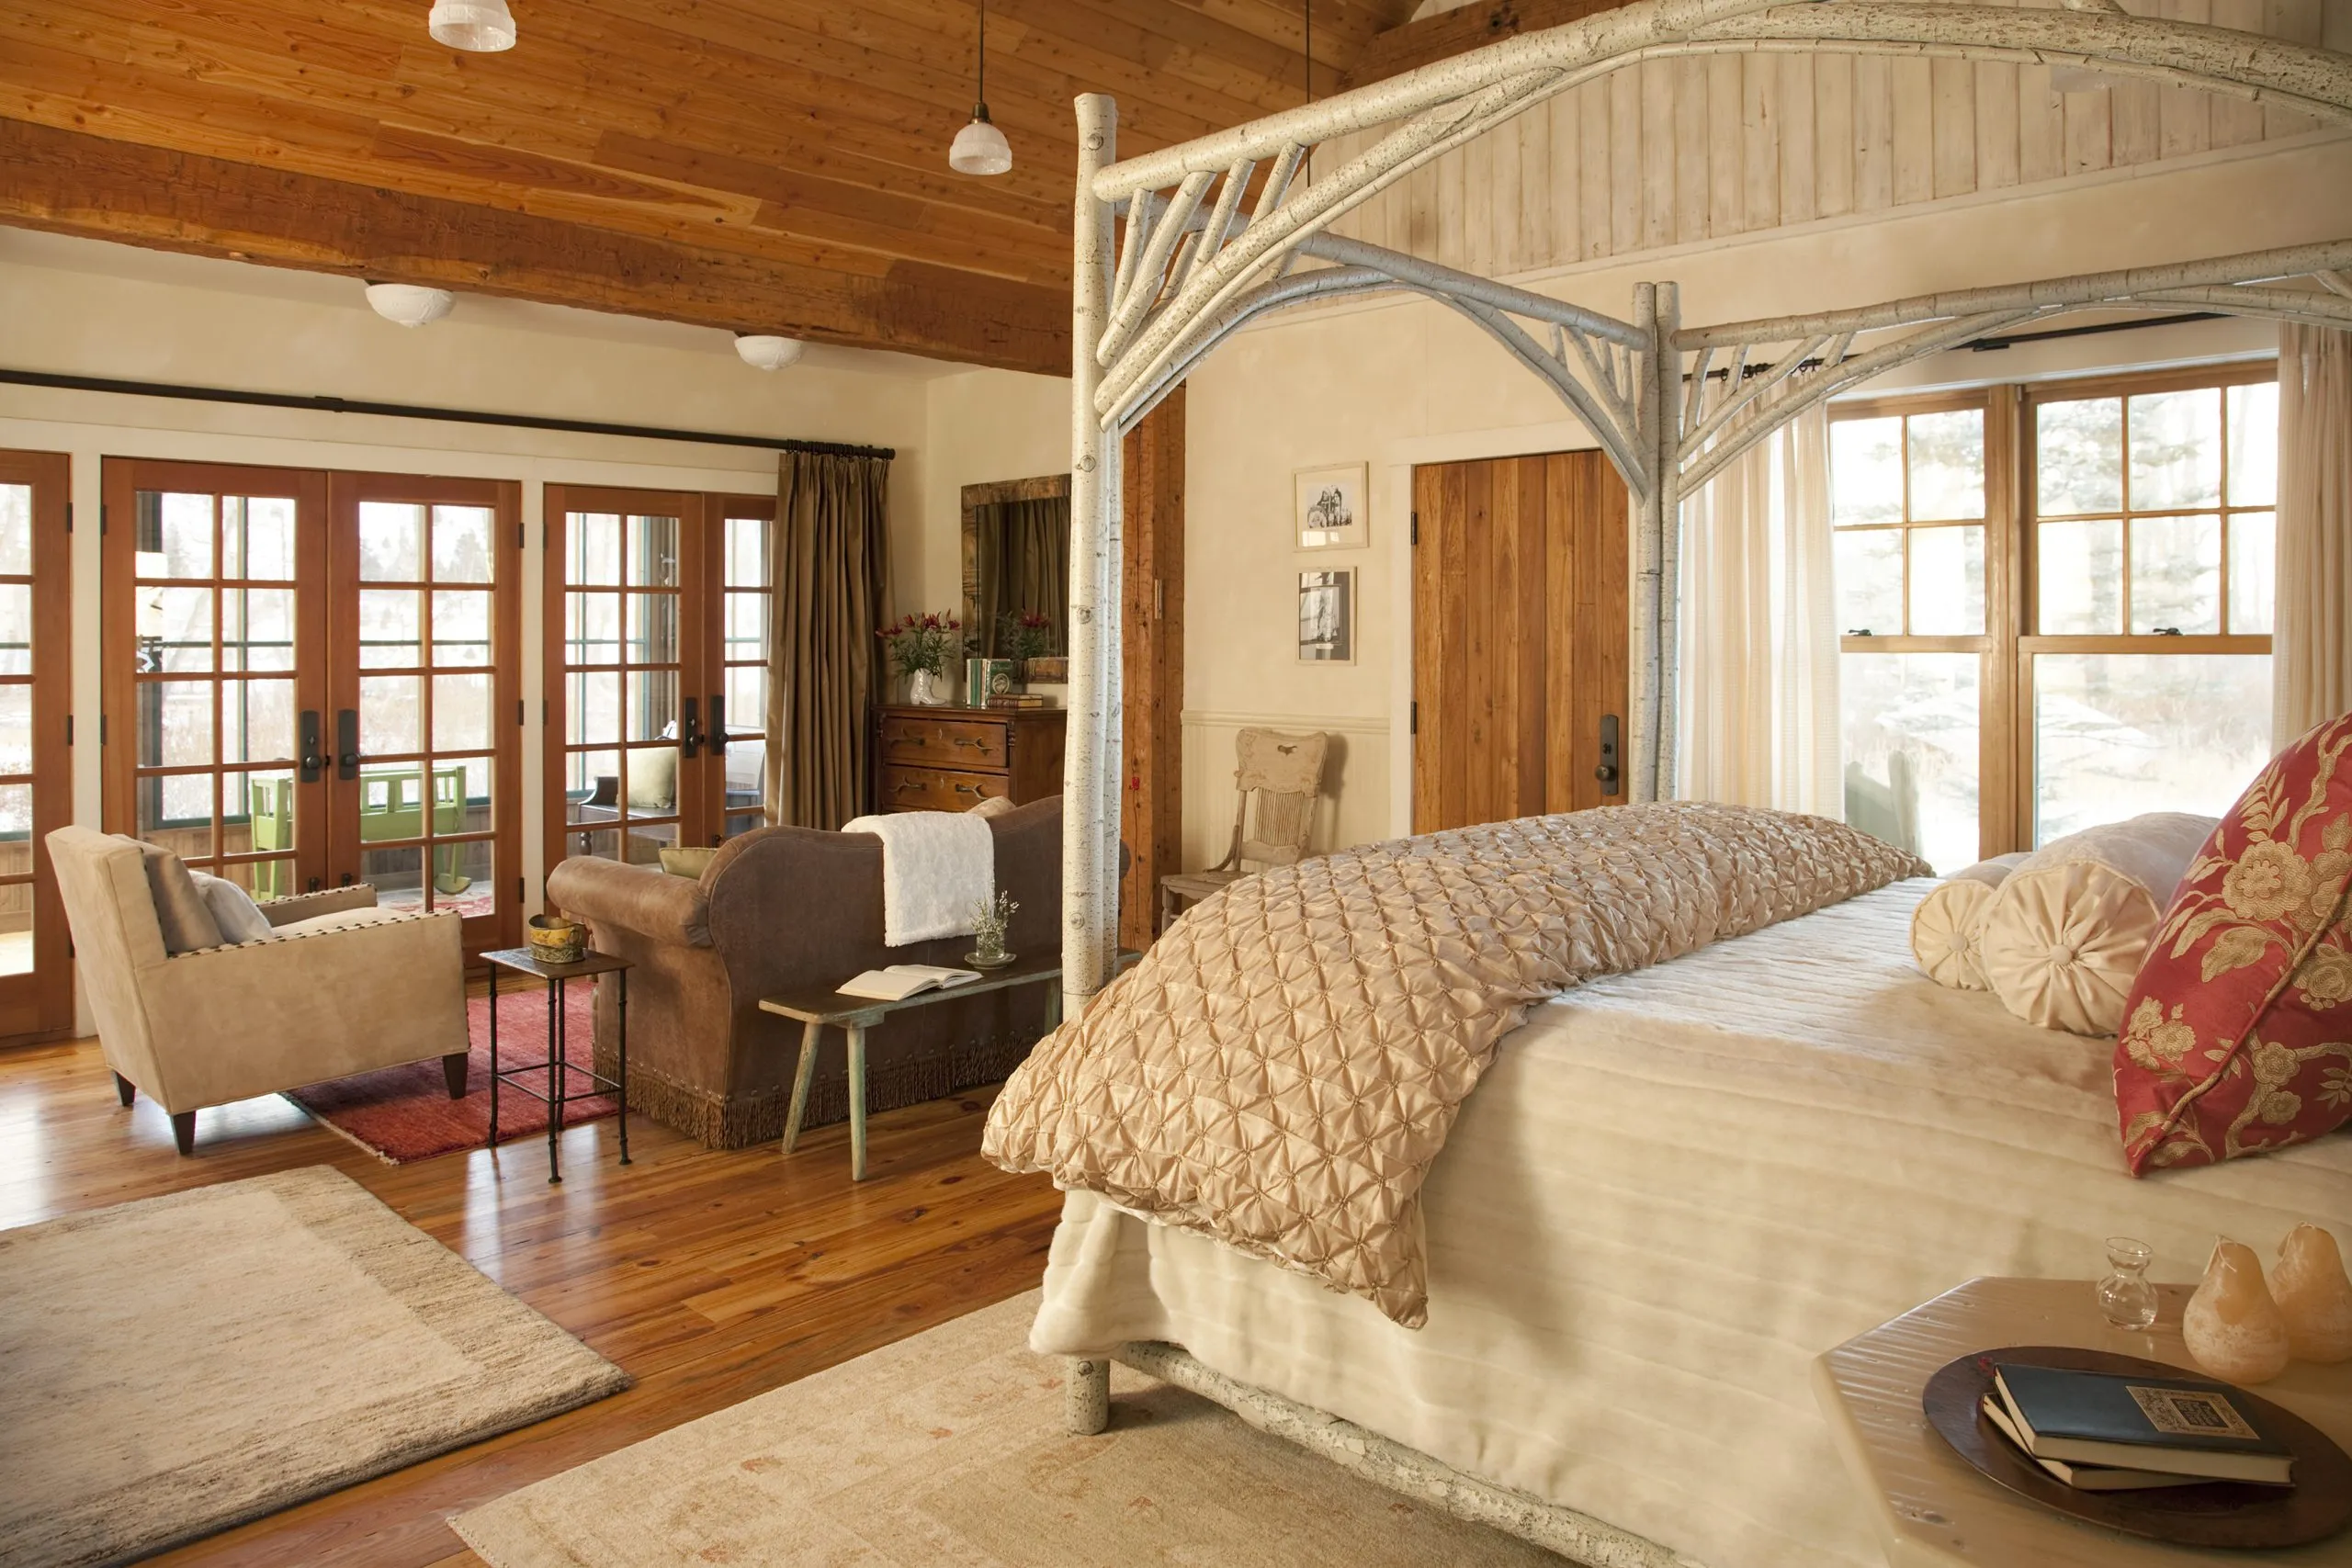 Cabin bedroom with several french doors that lead to a patio